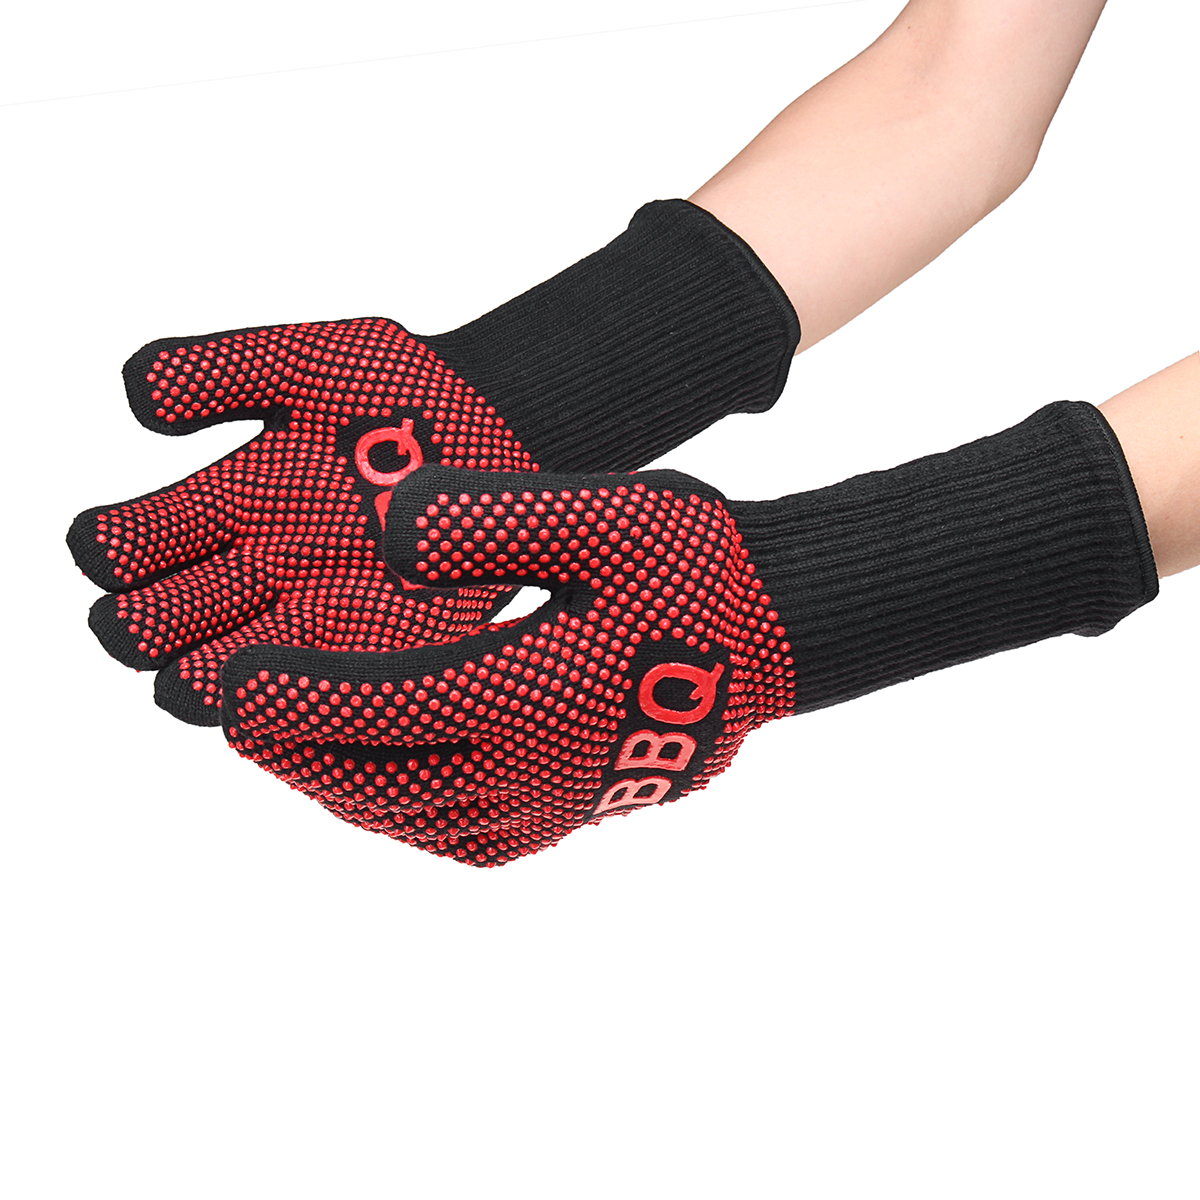 1-Pair-662degF-Heat-Proof-Resistant-Barbecue-BBQ-Grilling-Gloves-Kitchen-Cooking-Work-1364219